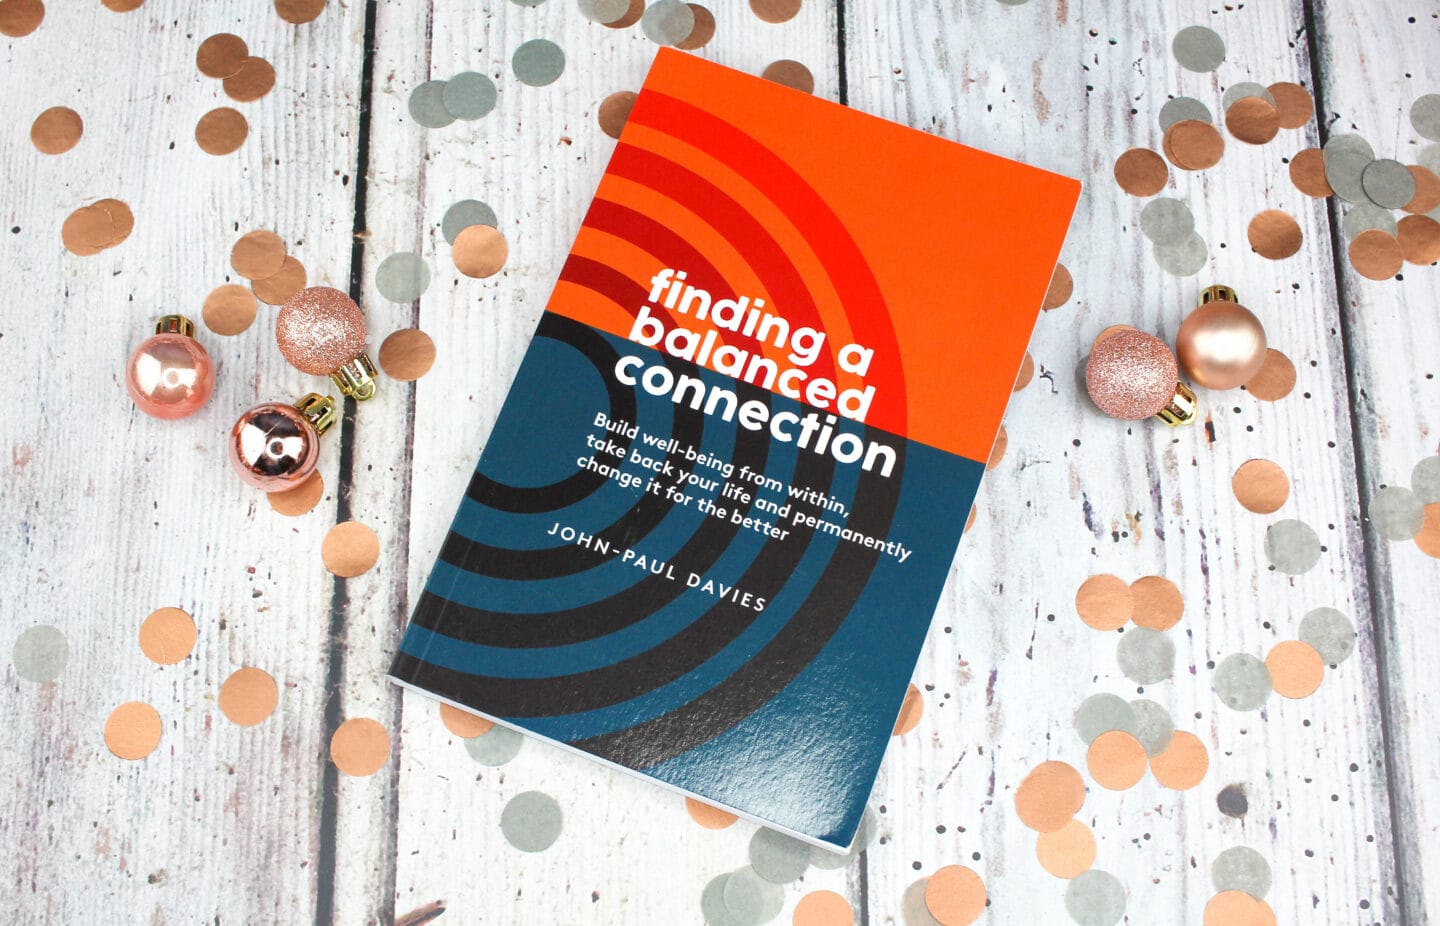 Finding a Balanced Connection RRP £12.99